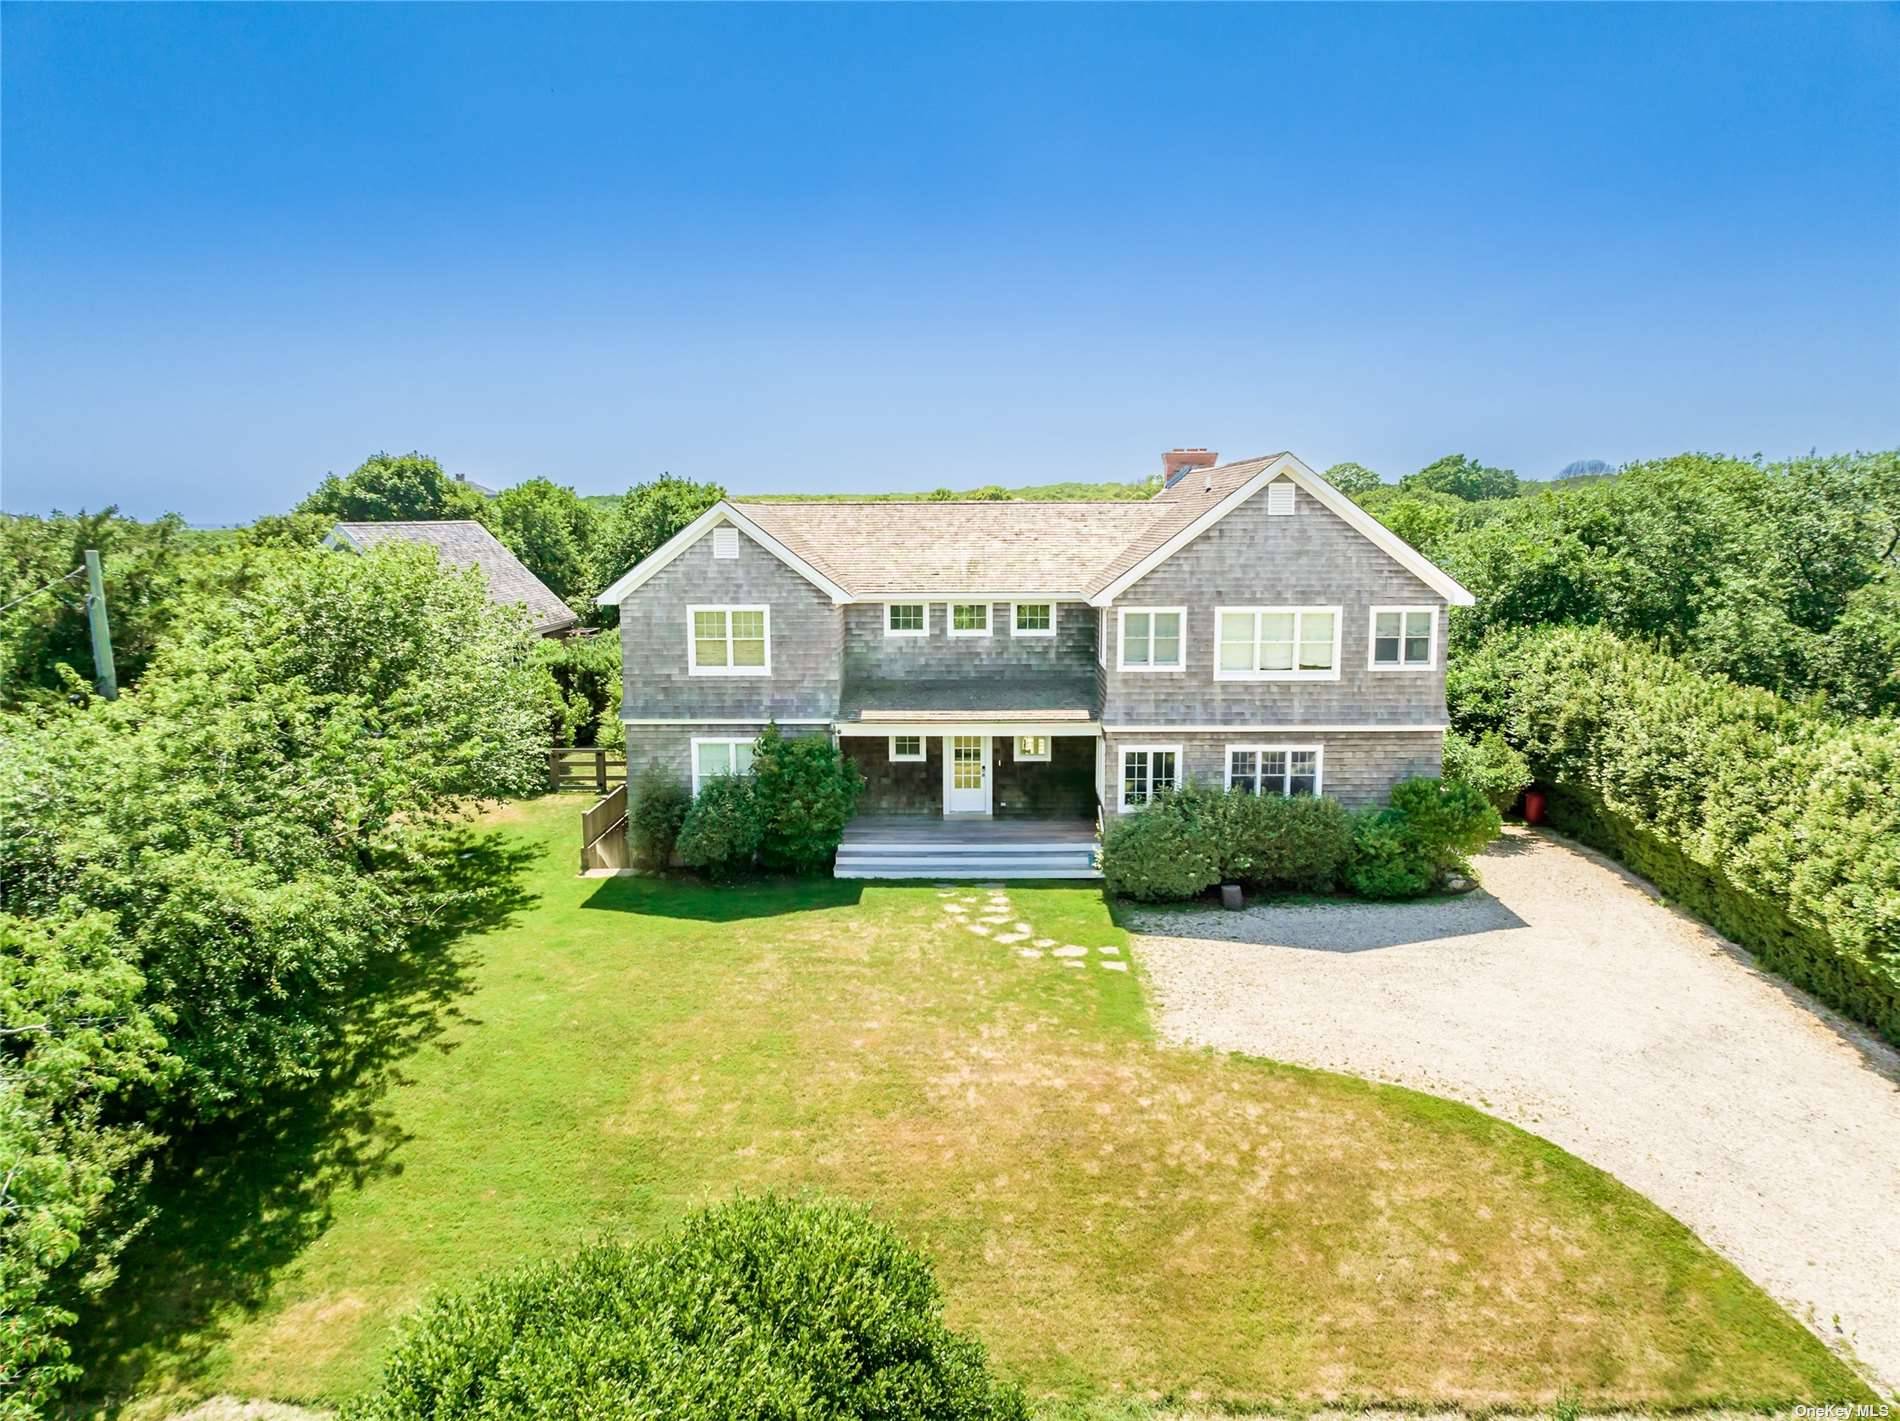 Ocean Breeze Ditch Plains Montauk Stylish and inviting 5 bedroom home on just under a half acre with a pool and gated entrance in the desirable Ditch Plains area of ...